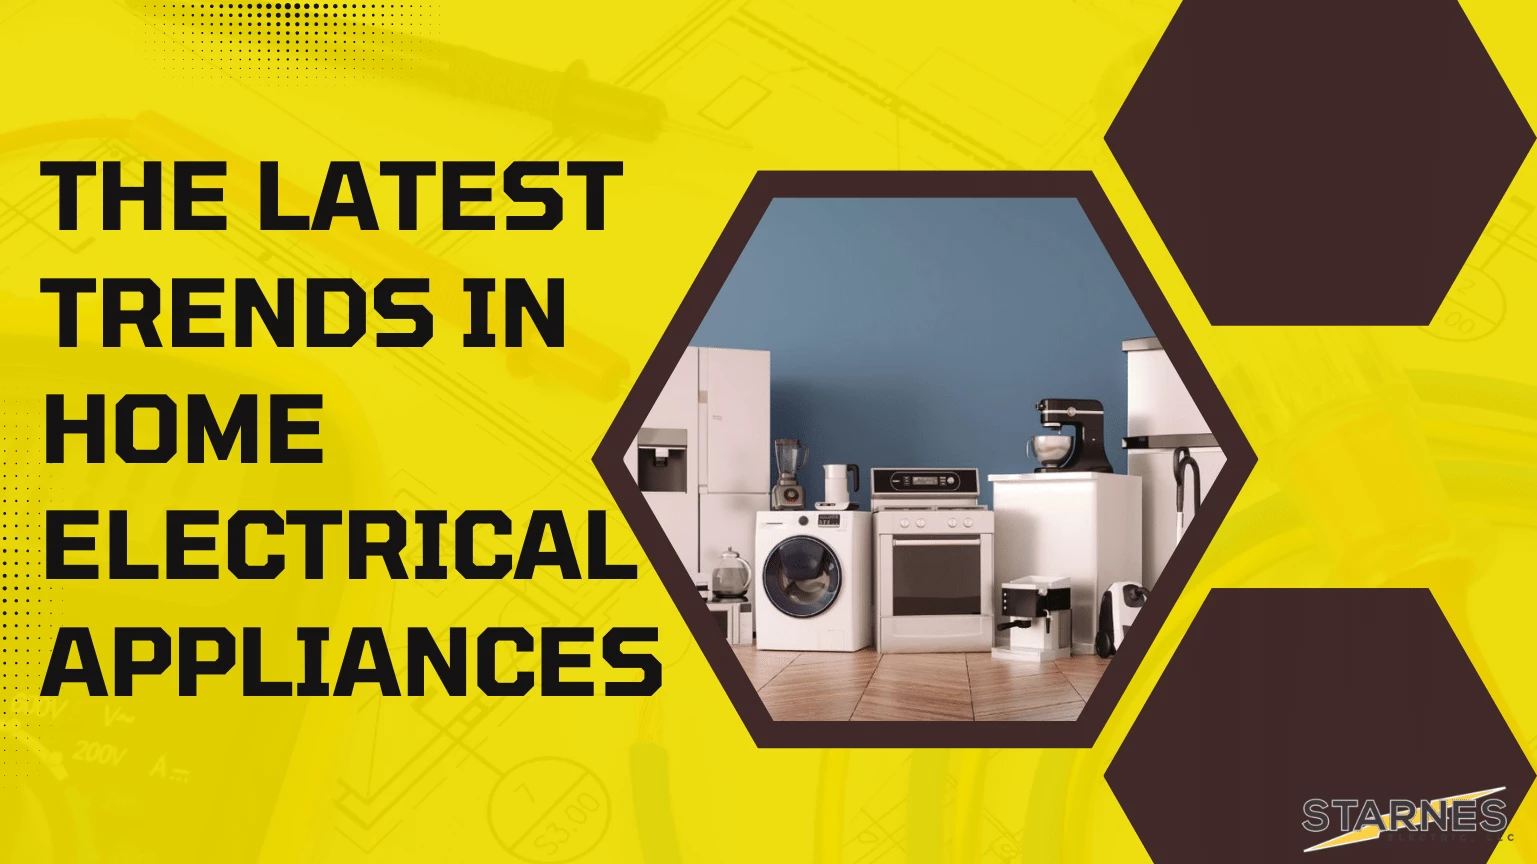 The Latest Trends in Home Electrical Appliances